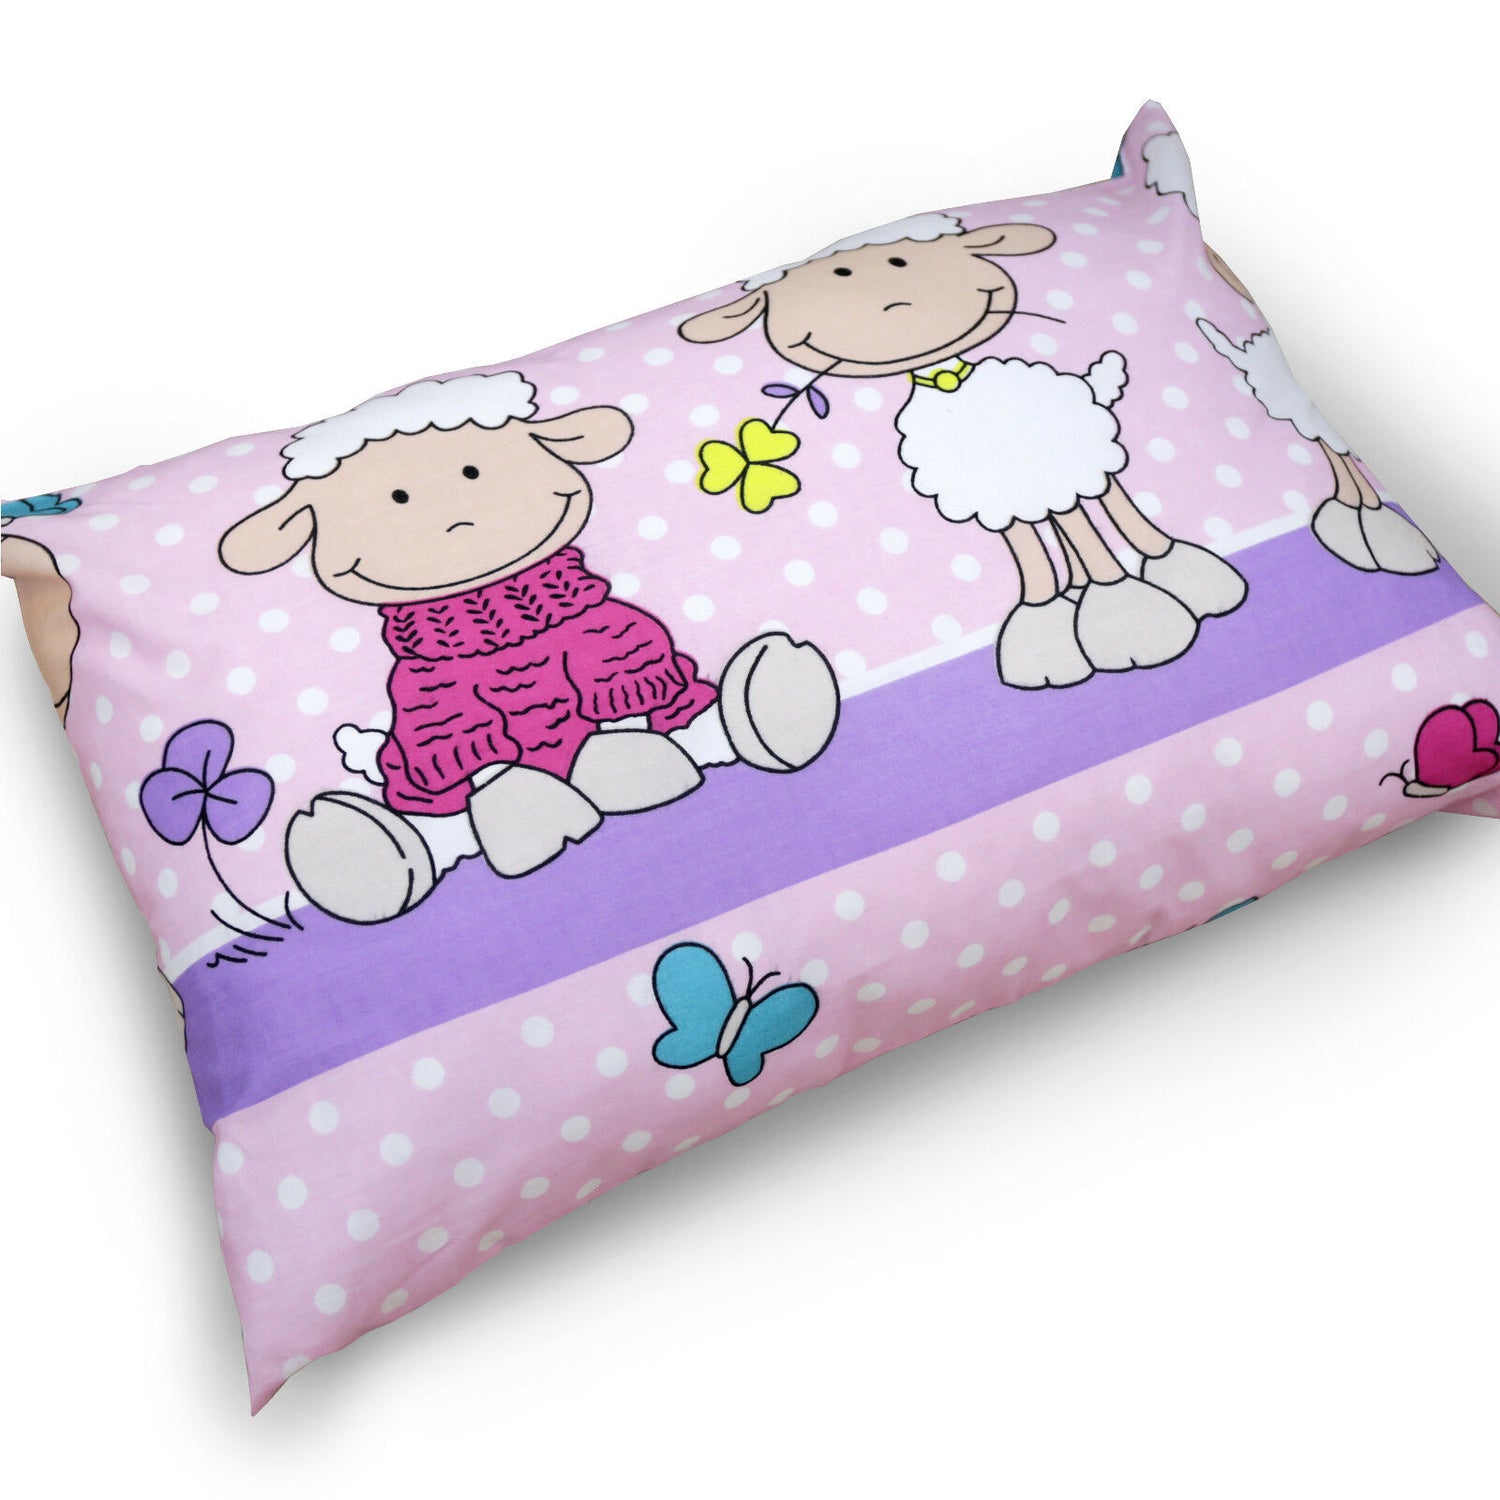 Baby Pillow case with zipper closure 60x40cm Cotton ANTI-ALLERGENIC Sheep Pink